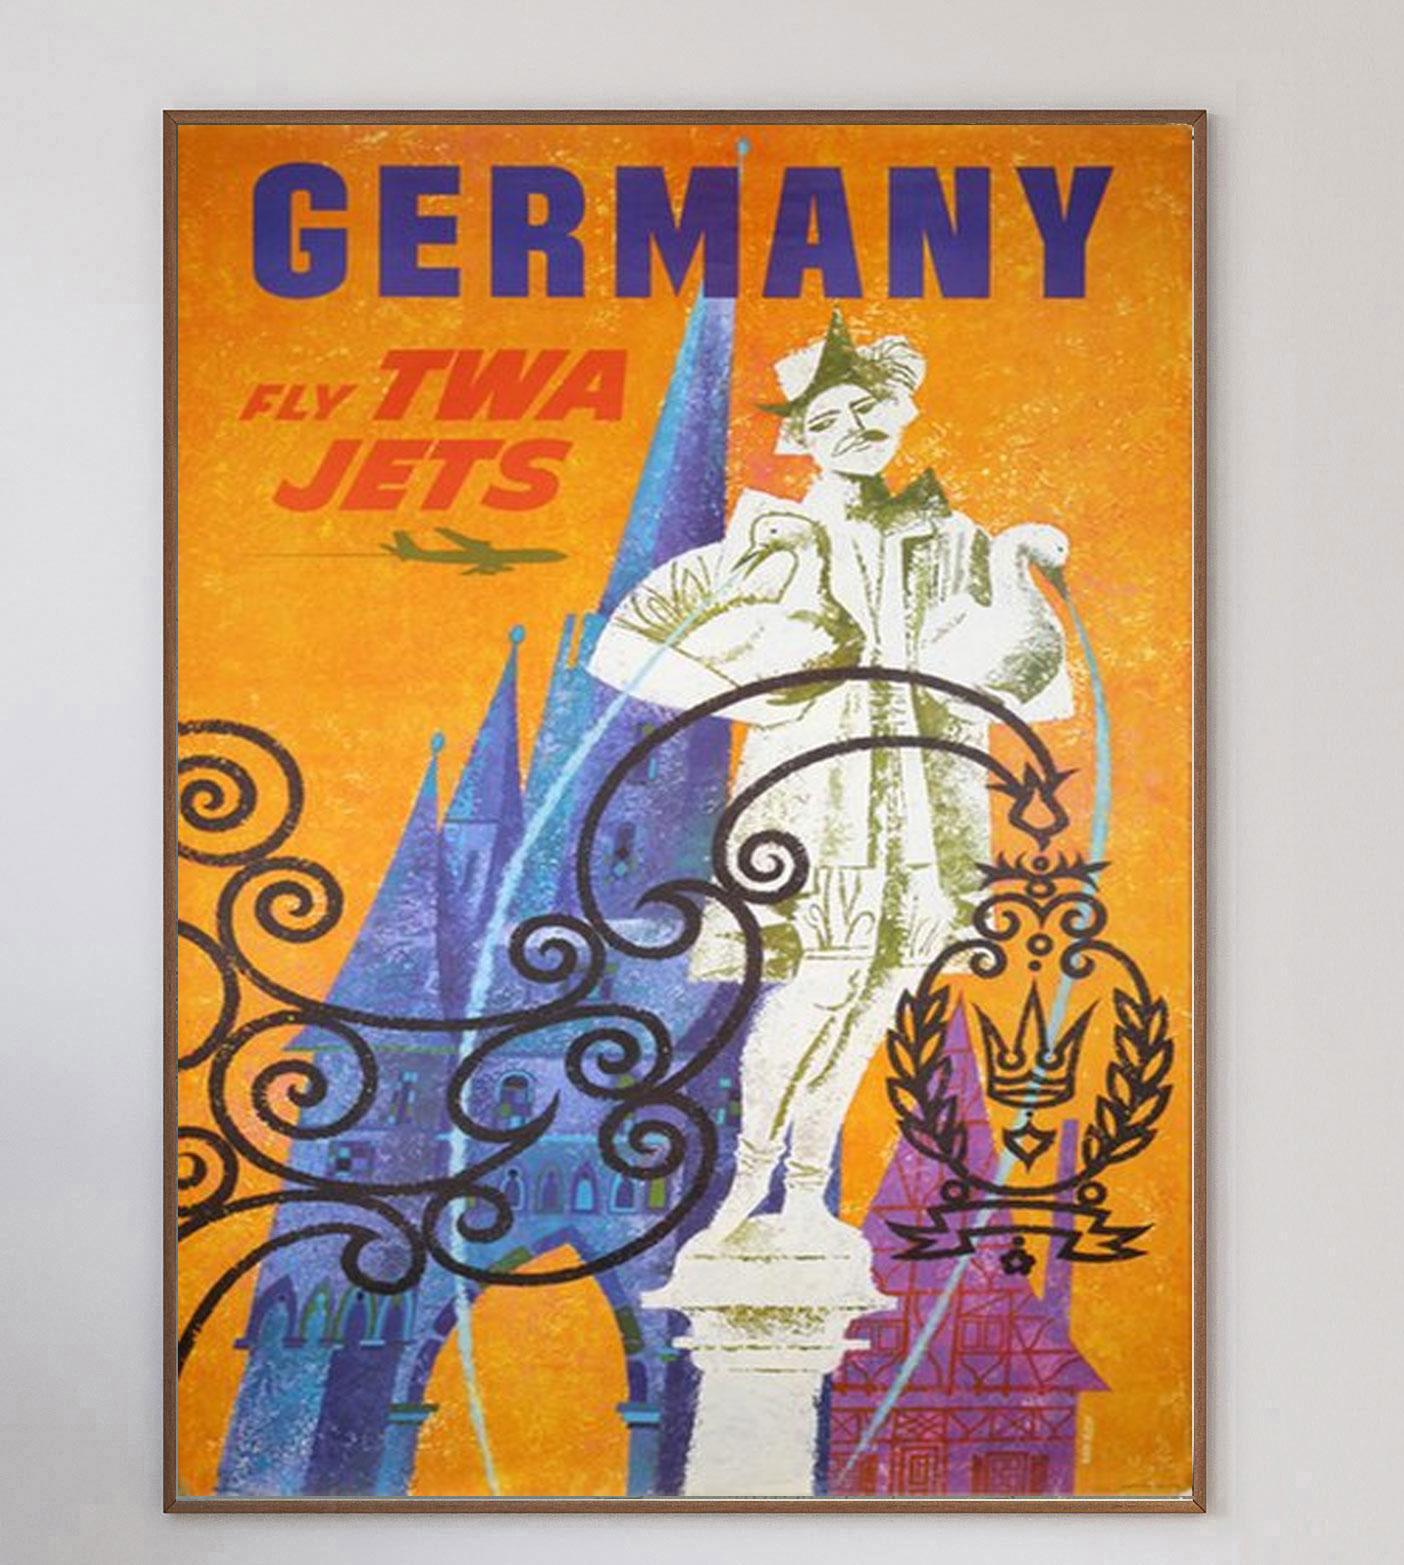 This poster was created in 1959 for Howard Hughes’ Trans World Airlines promoting their routes to Germany from the USA. Illustrated by influential American artist David Klein, this design features German landmarks such as the Gansemannchen Fountain